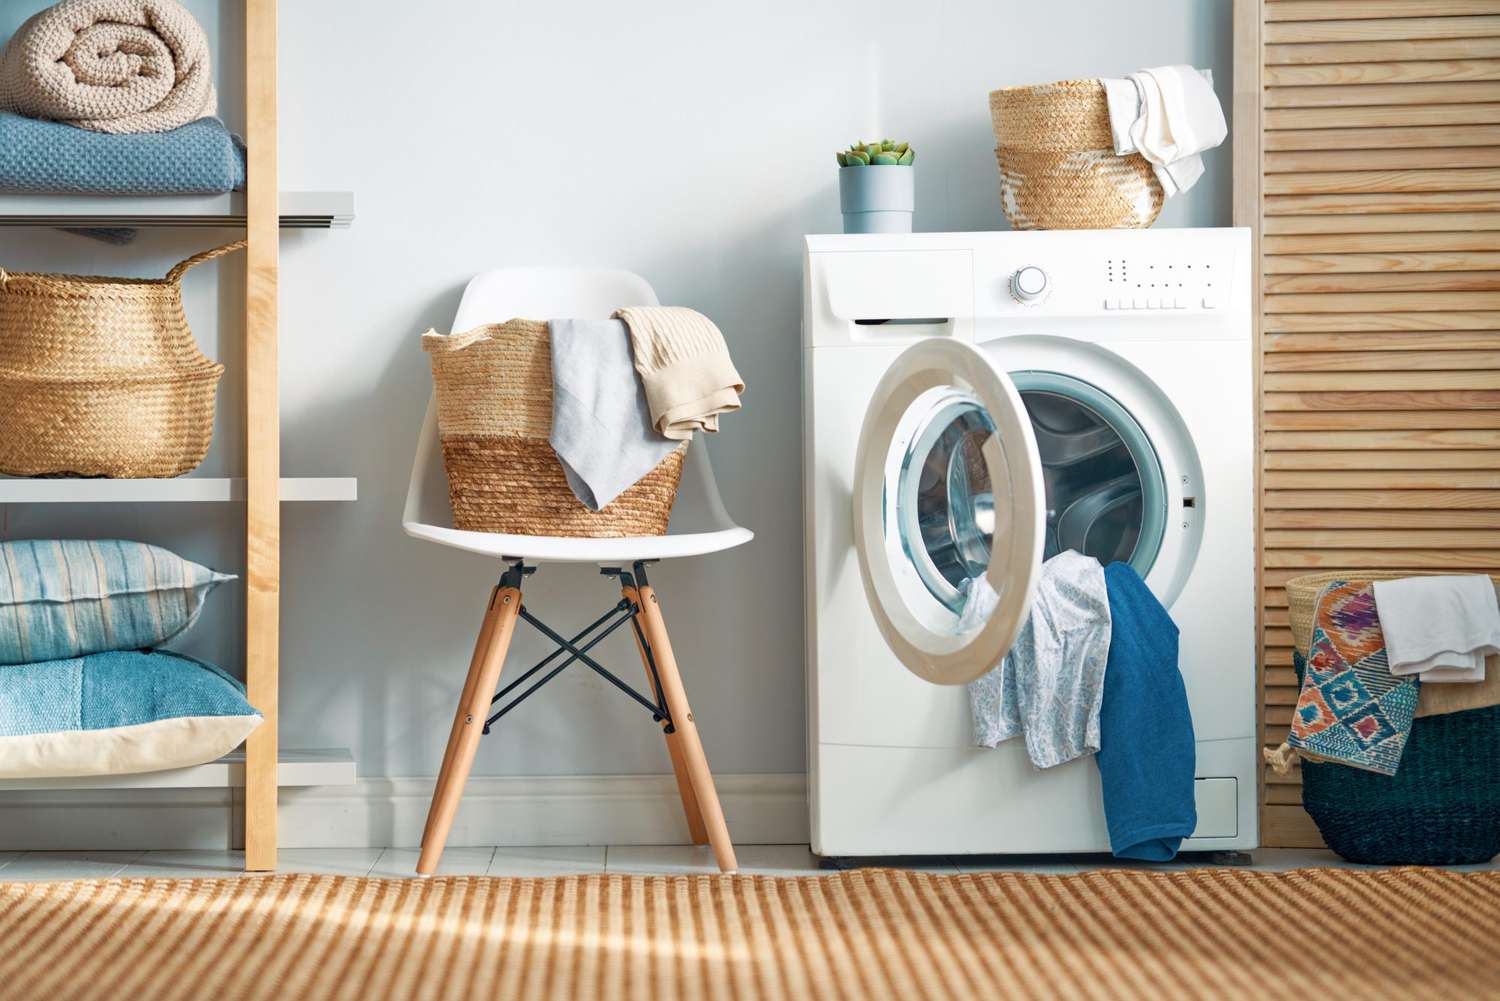 How To Clean A Washing Machine For Fresh Clothes And Linens